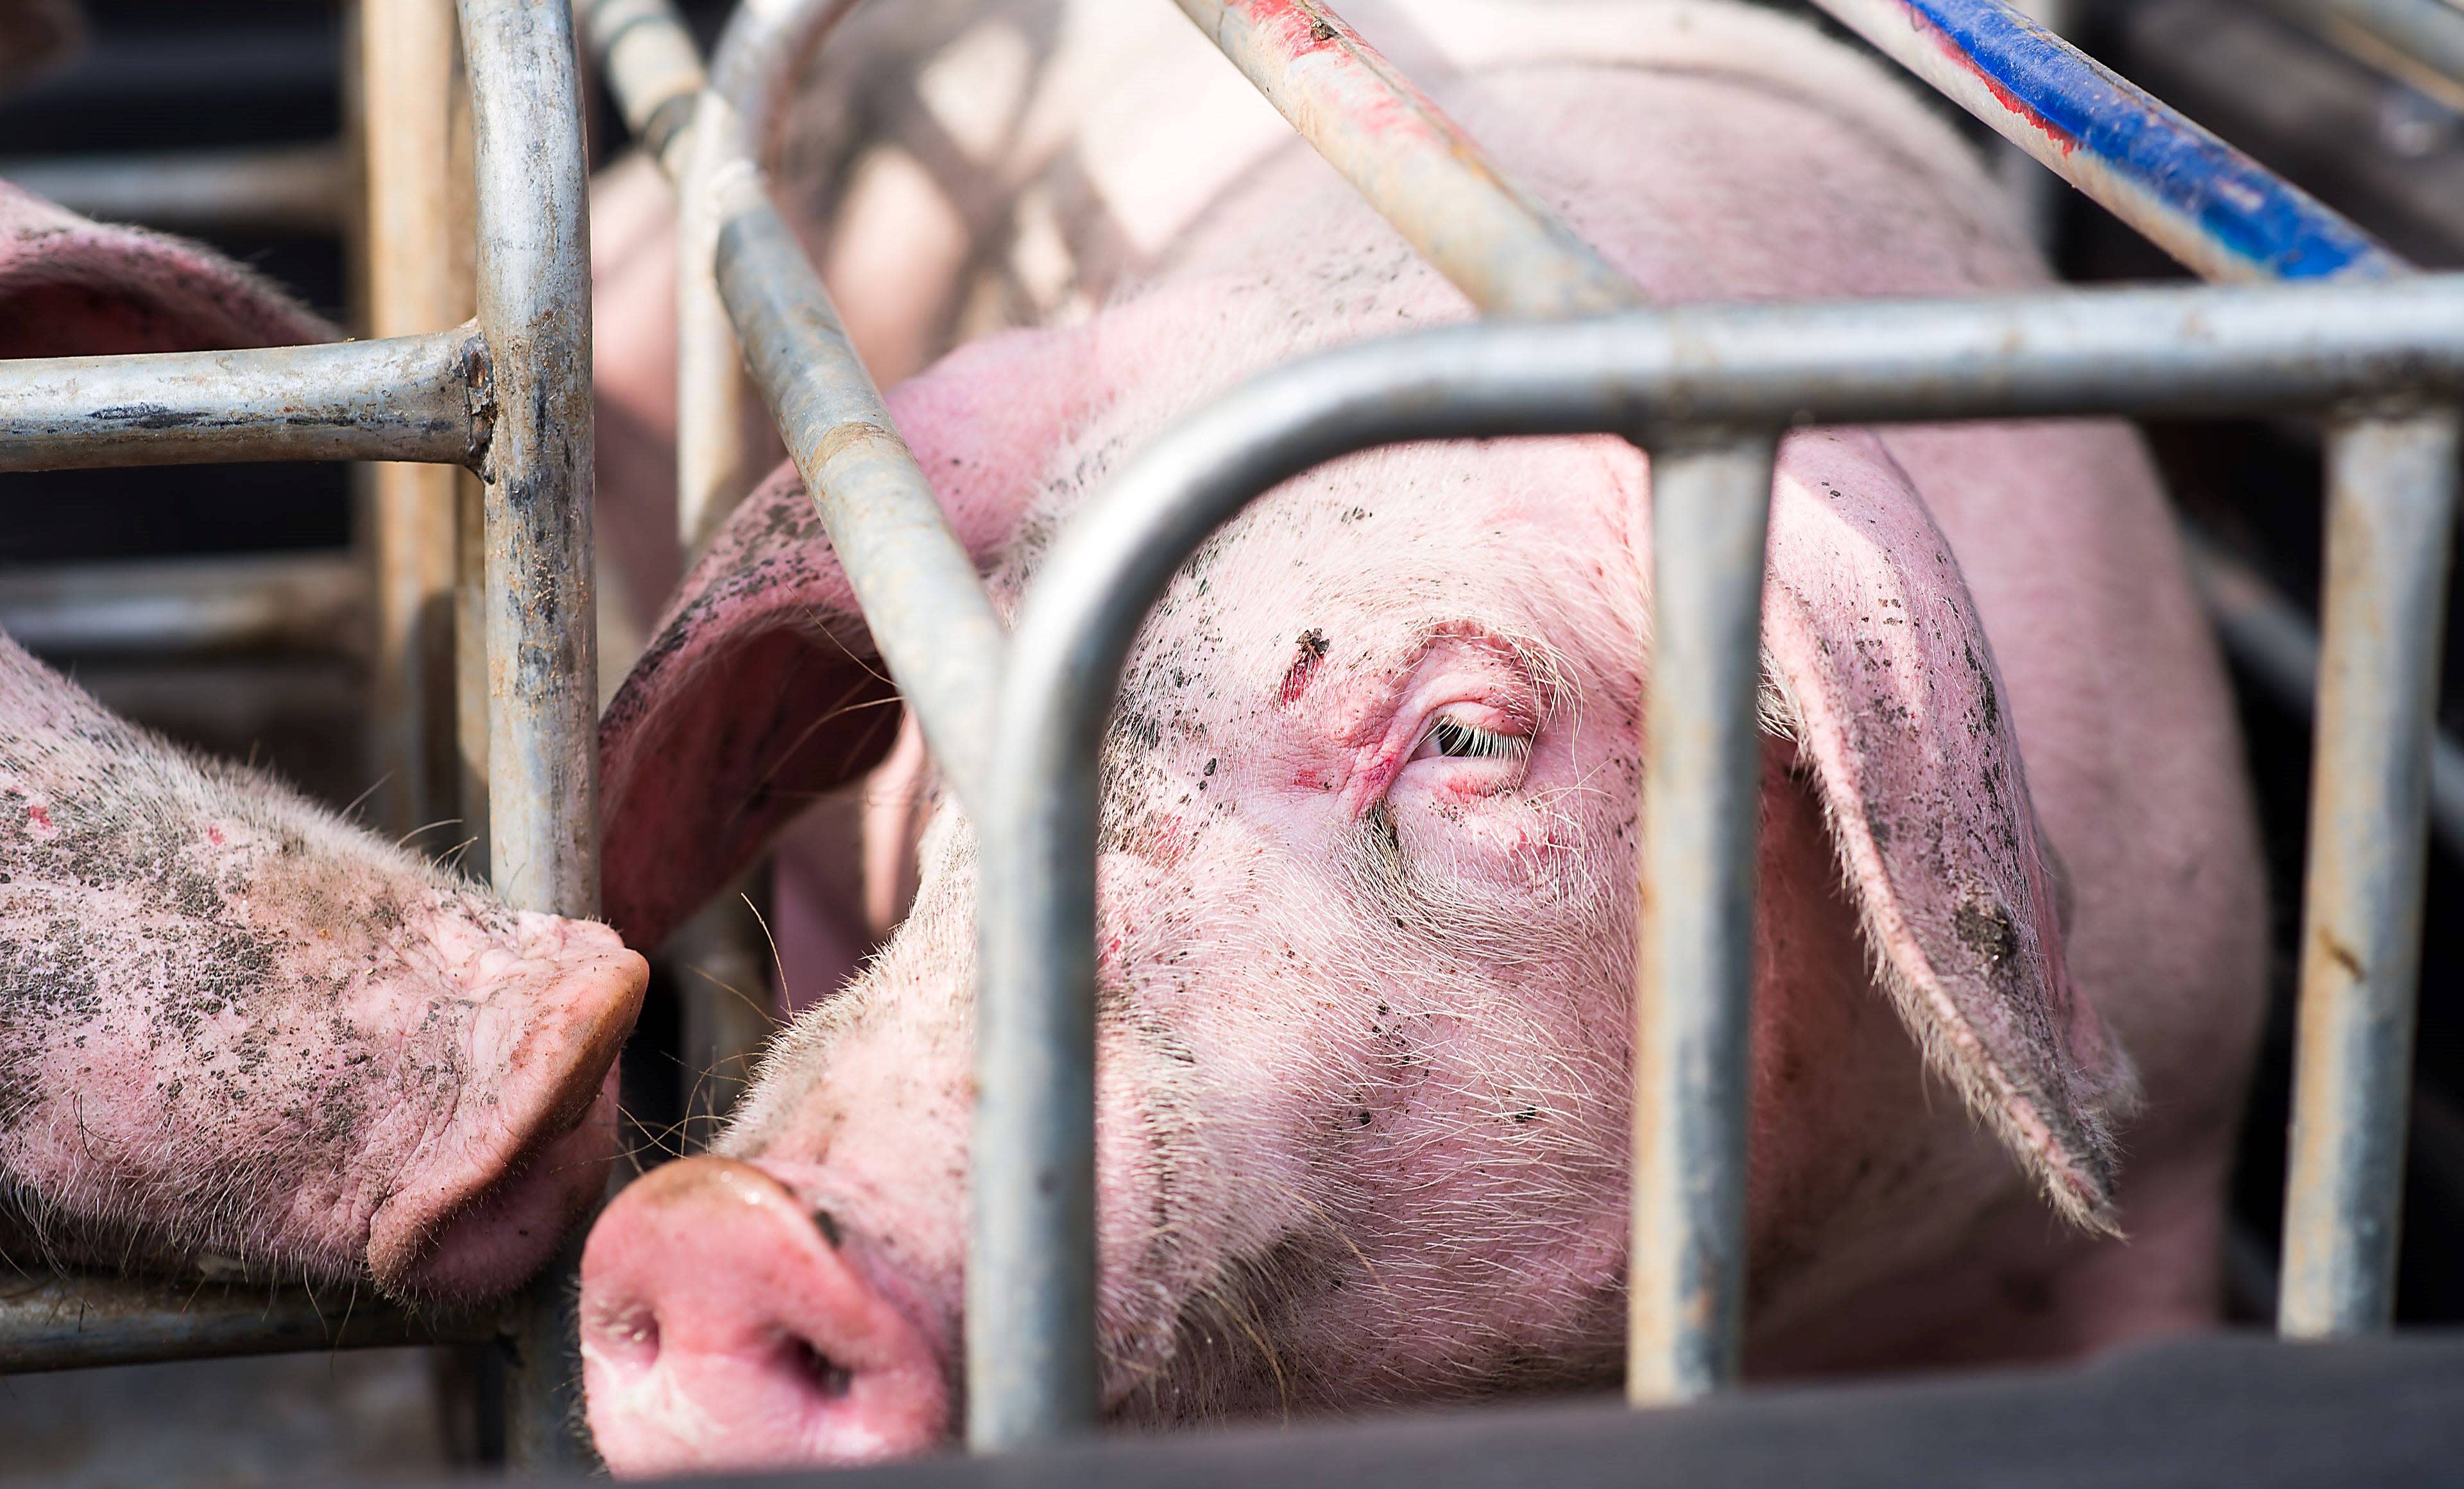 How Are Factory Farms Cruel to Animals?